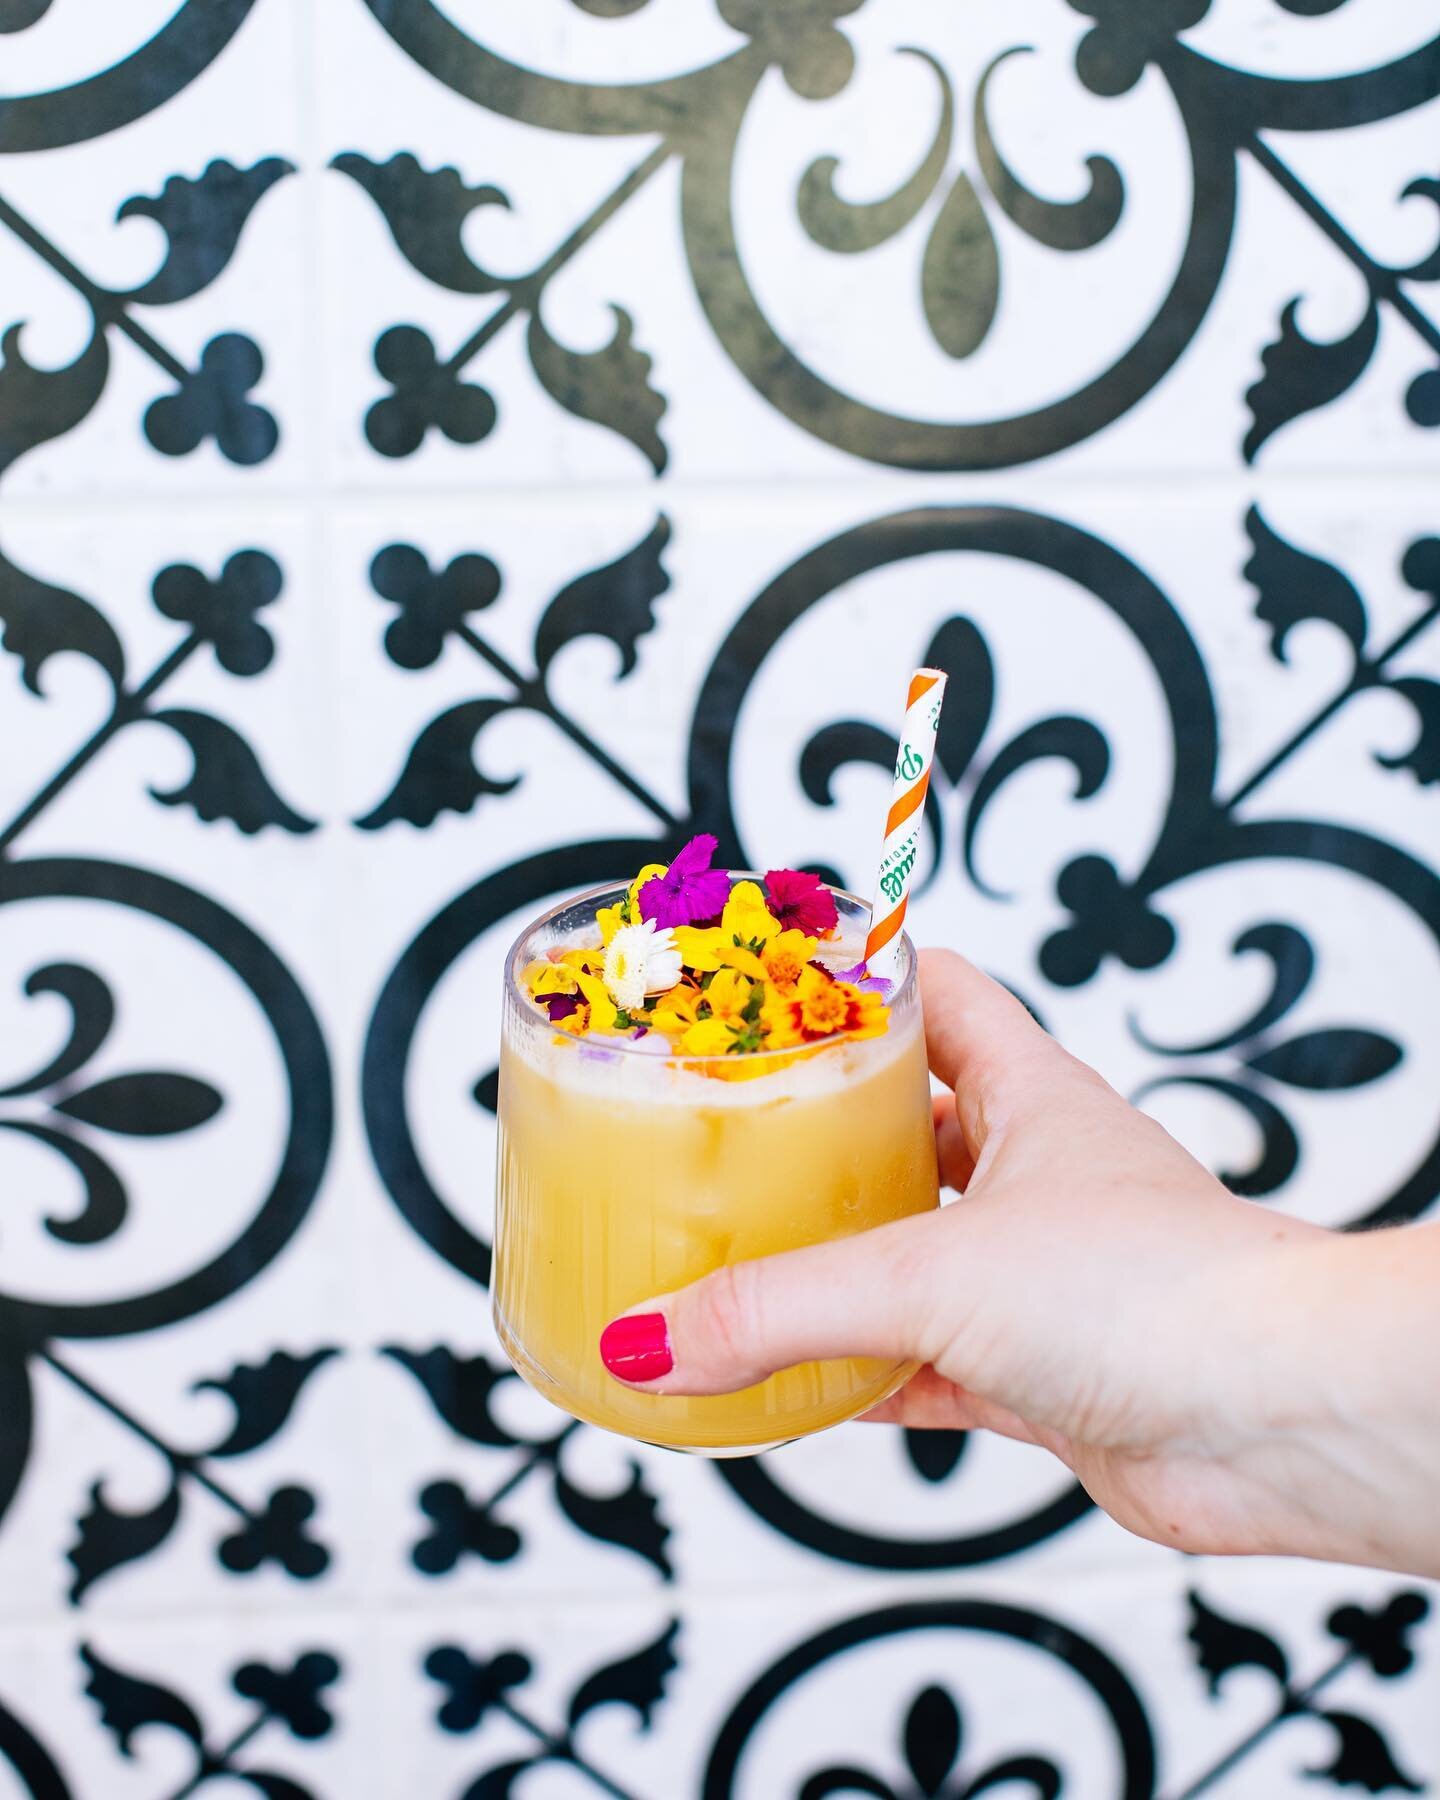 Almost too pretty to drink 🌸 Try our Pear-fection cocktail with Absolut Pears vodka, St. Germain elderflower liqueur, fresh lemon juice, and a decorative floral finish.